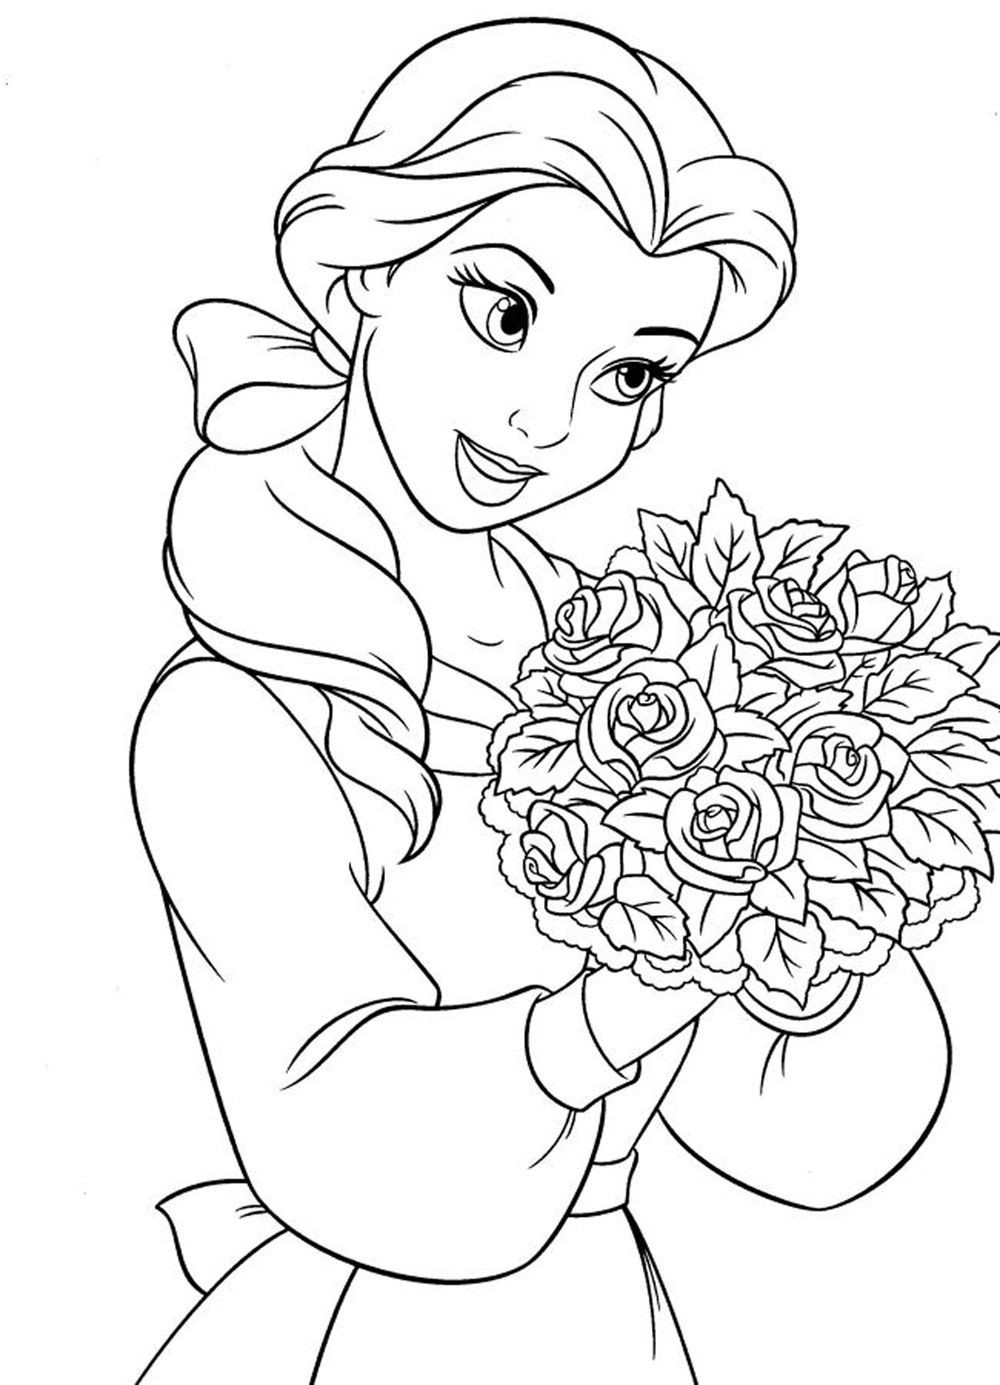 Fun Coloring Pages For Girls
 princess coloring pages for girls Free